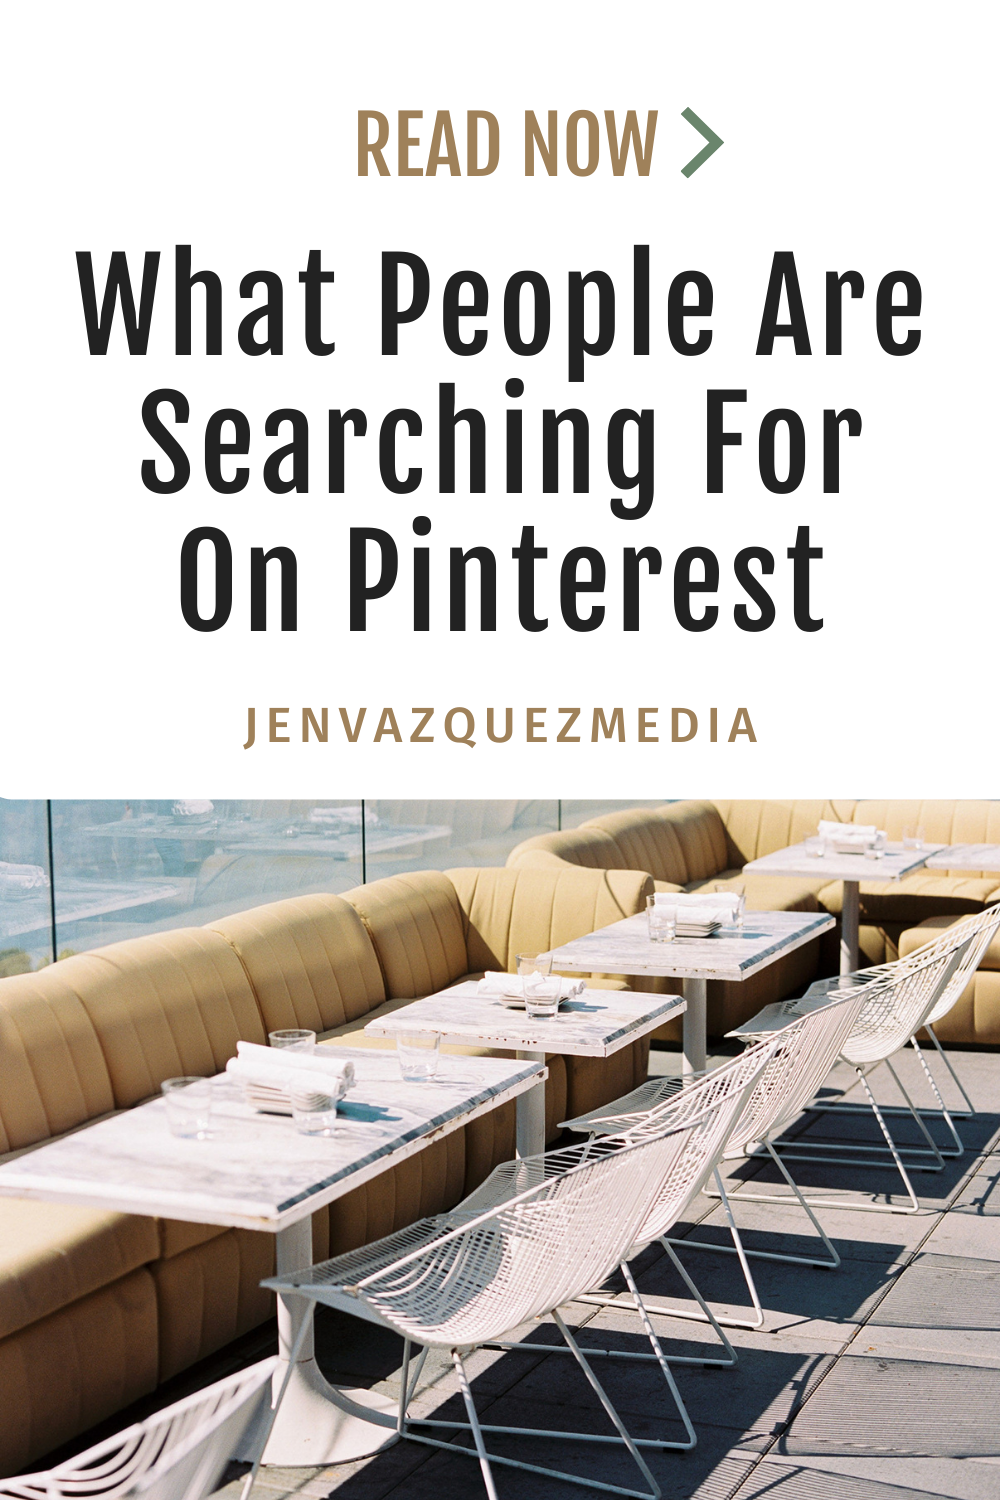 What people are searching for on Pinterest 8-11 All Dressed Up pins 